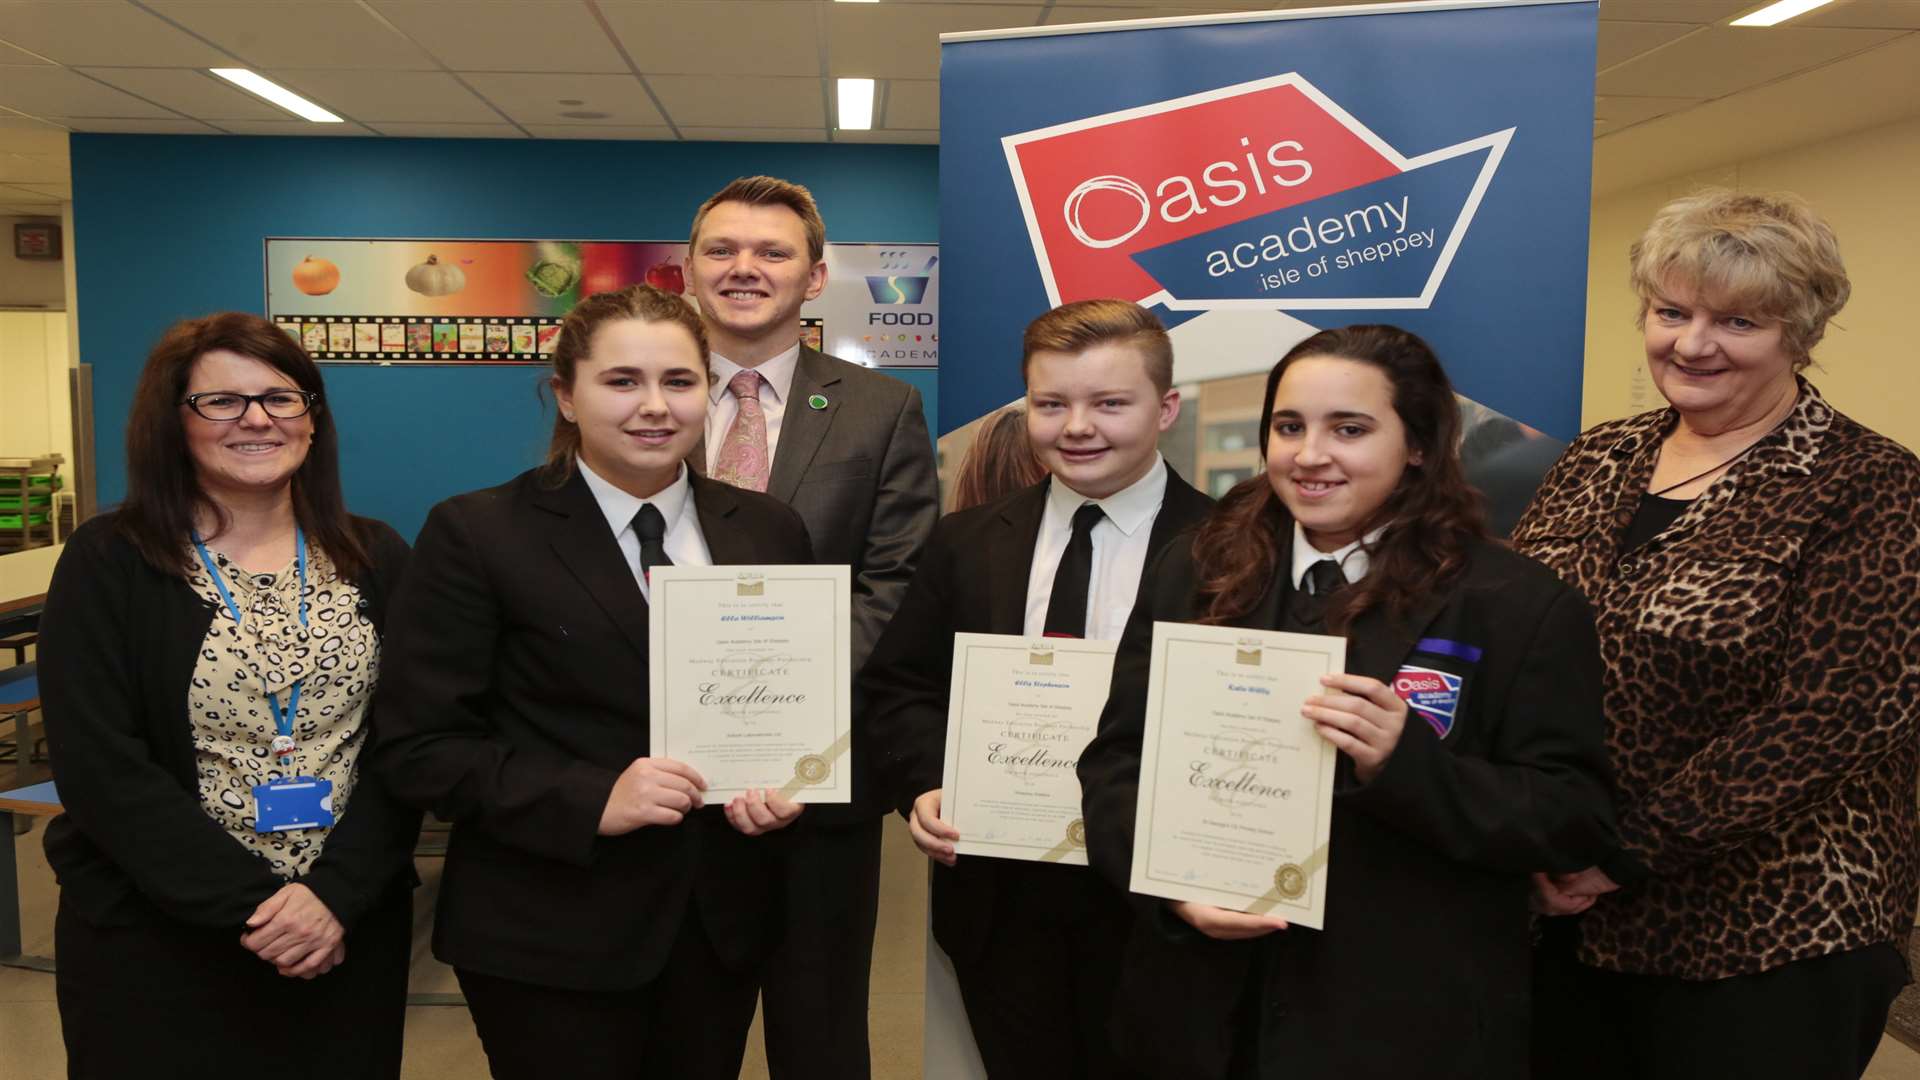 Pupils are rewarded for doing well in their work experience placements